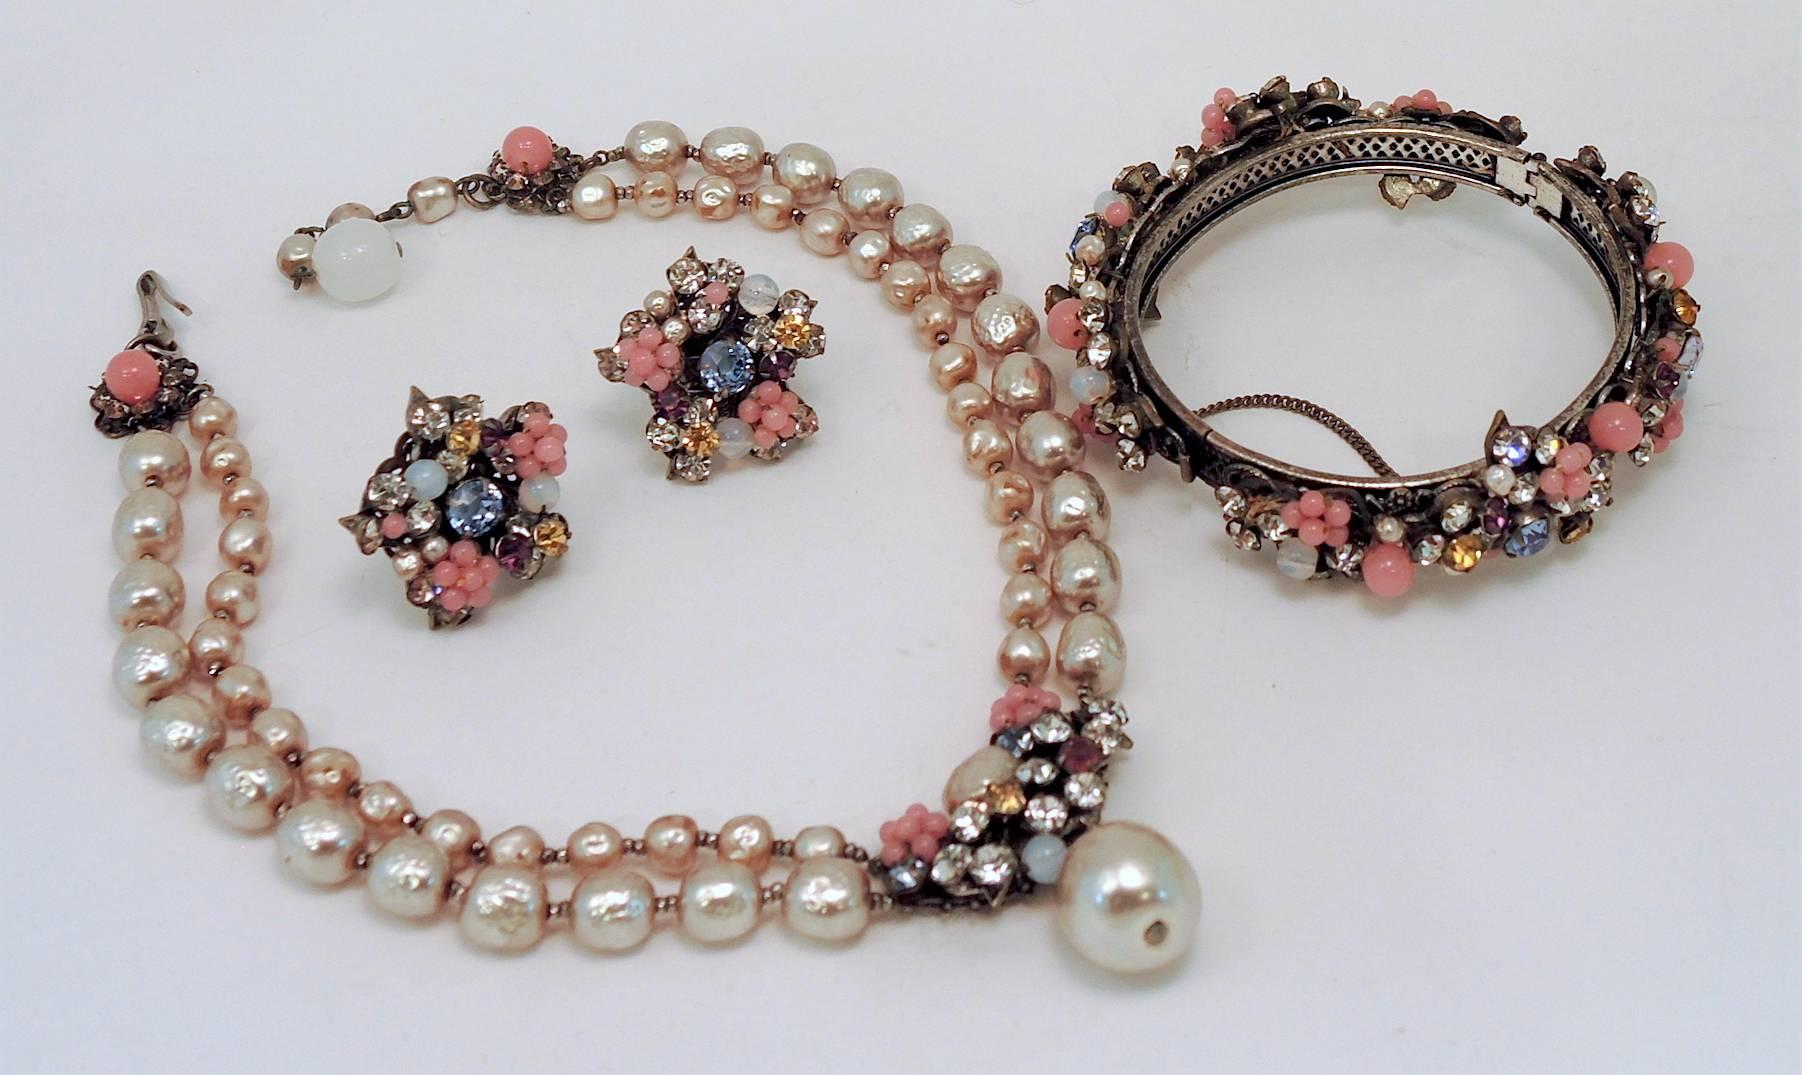 This is quite a find. This Miriam Haskell parure features a double strand necklace made of faux baroque pearls leading down an intricate centerpiece. The centerpiece has a pink glass flower on each side and rose montee stones with a large baroque